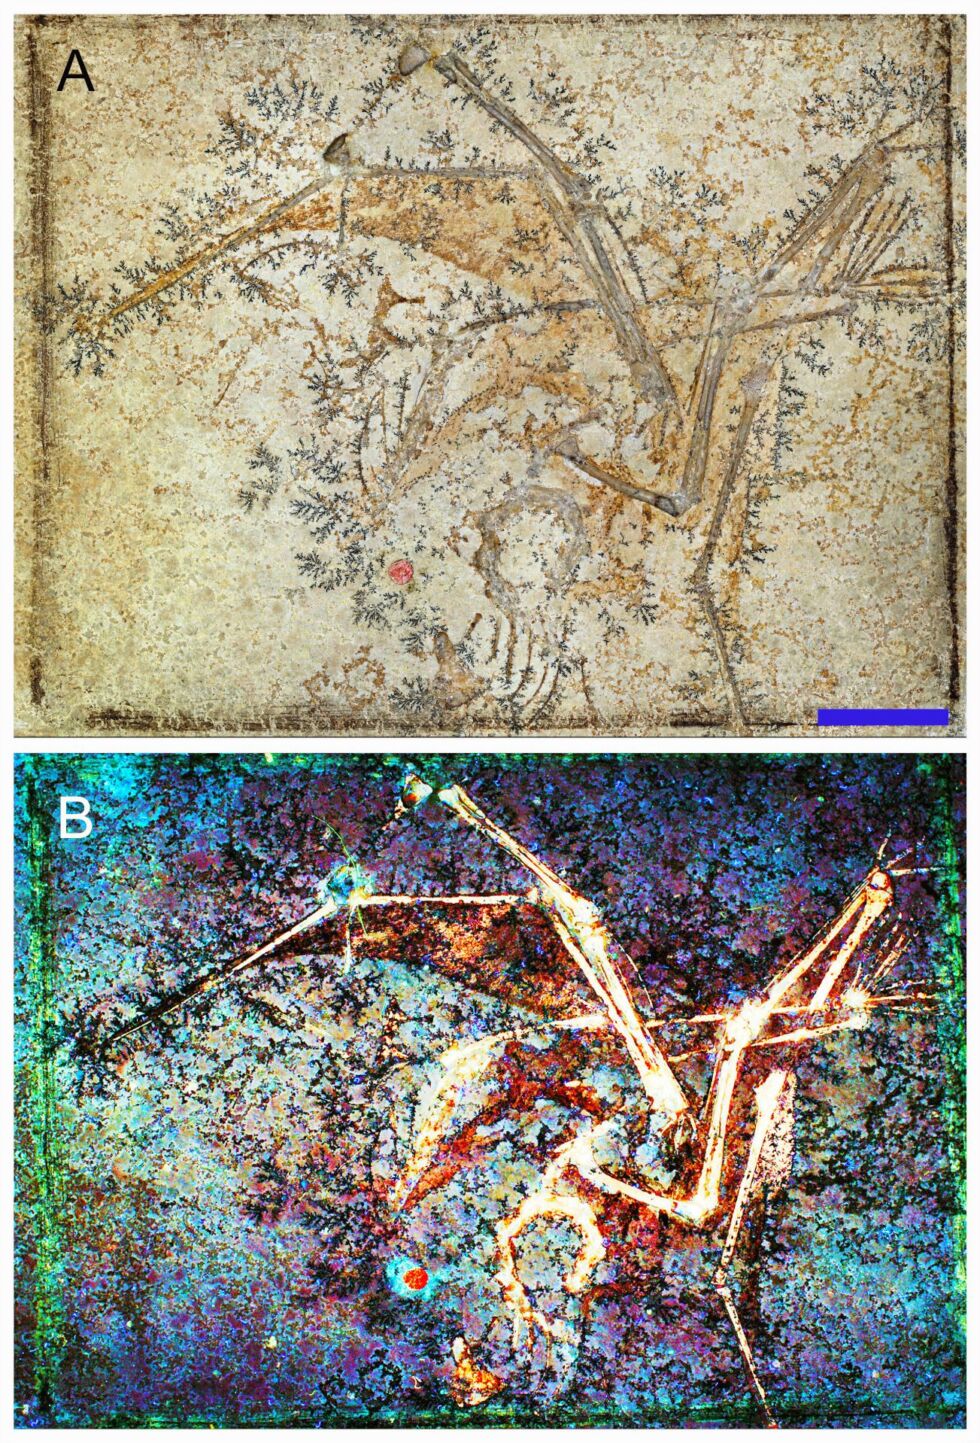 Skeleton and associated soft tissues of the aurorazhdarchid pterosaur fossil.